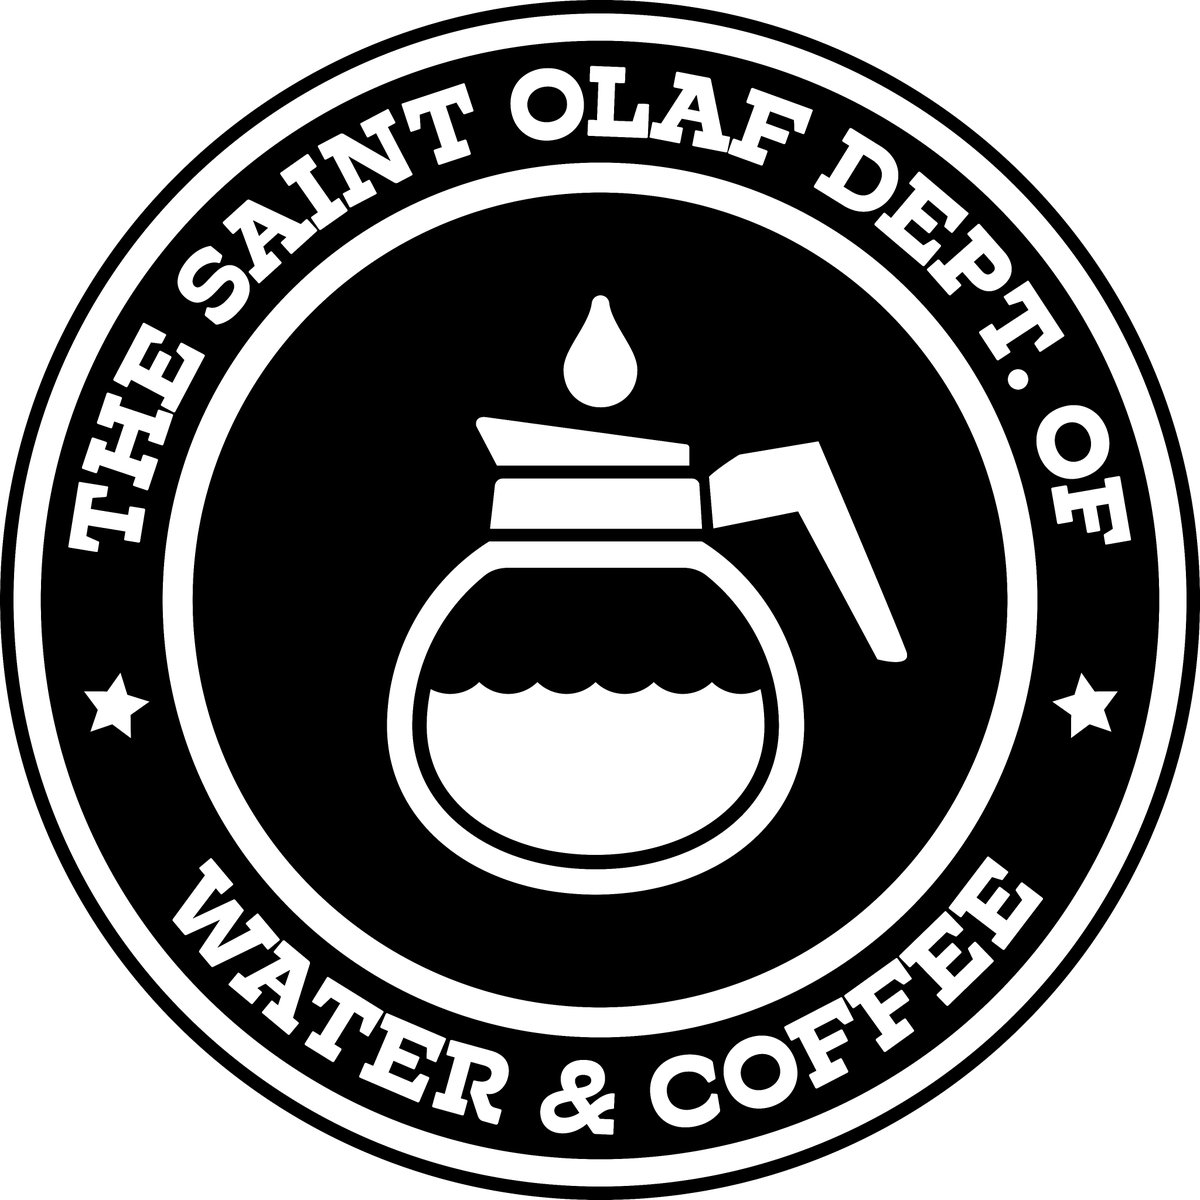 Have you checked with the St. Olaf Dept. of Water & Coffee to make sure that the coffee you enjoy with the slut & moron you live with isn't decaf?  #GoldenGirlsEveryDay  https://www.redbubble.com/shop/ap/47757001(yes, I'm allowed to self promote from time to time)